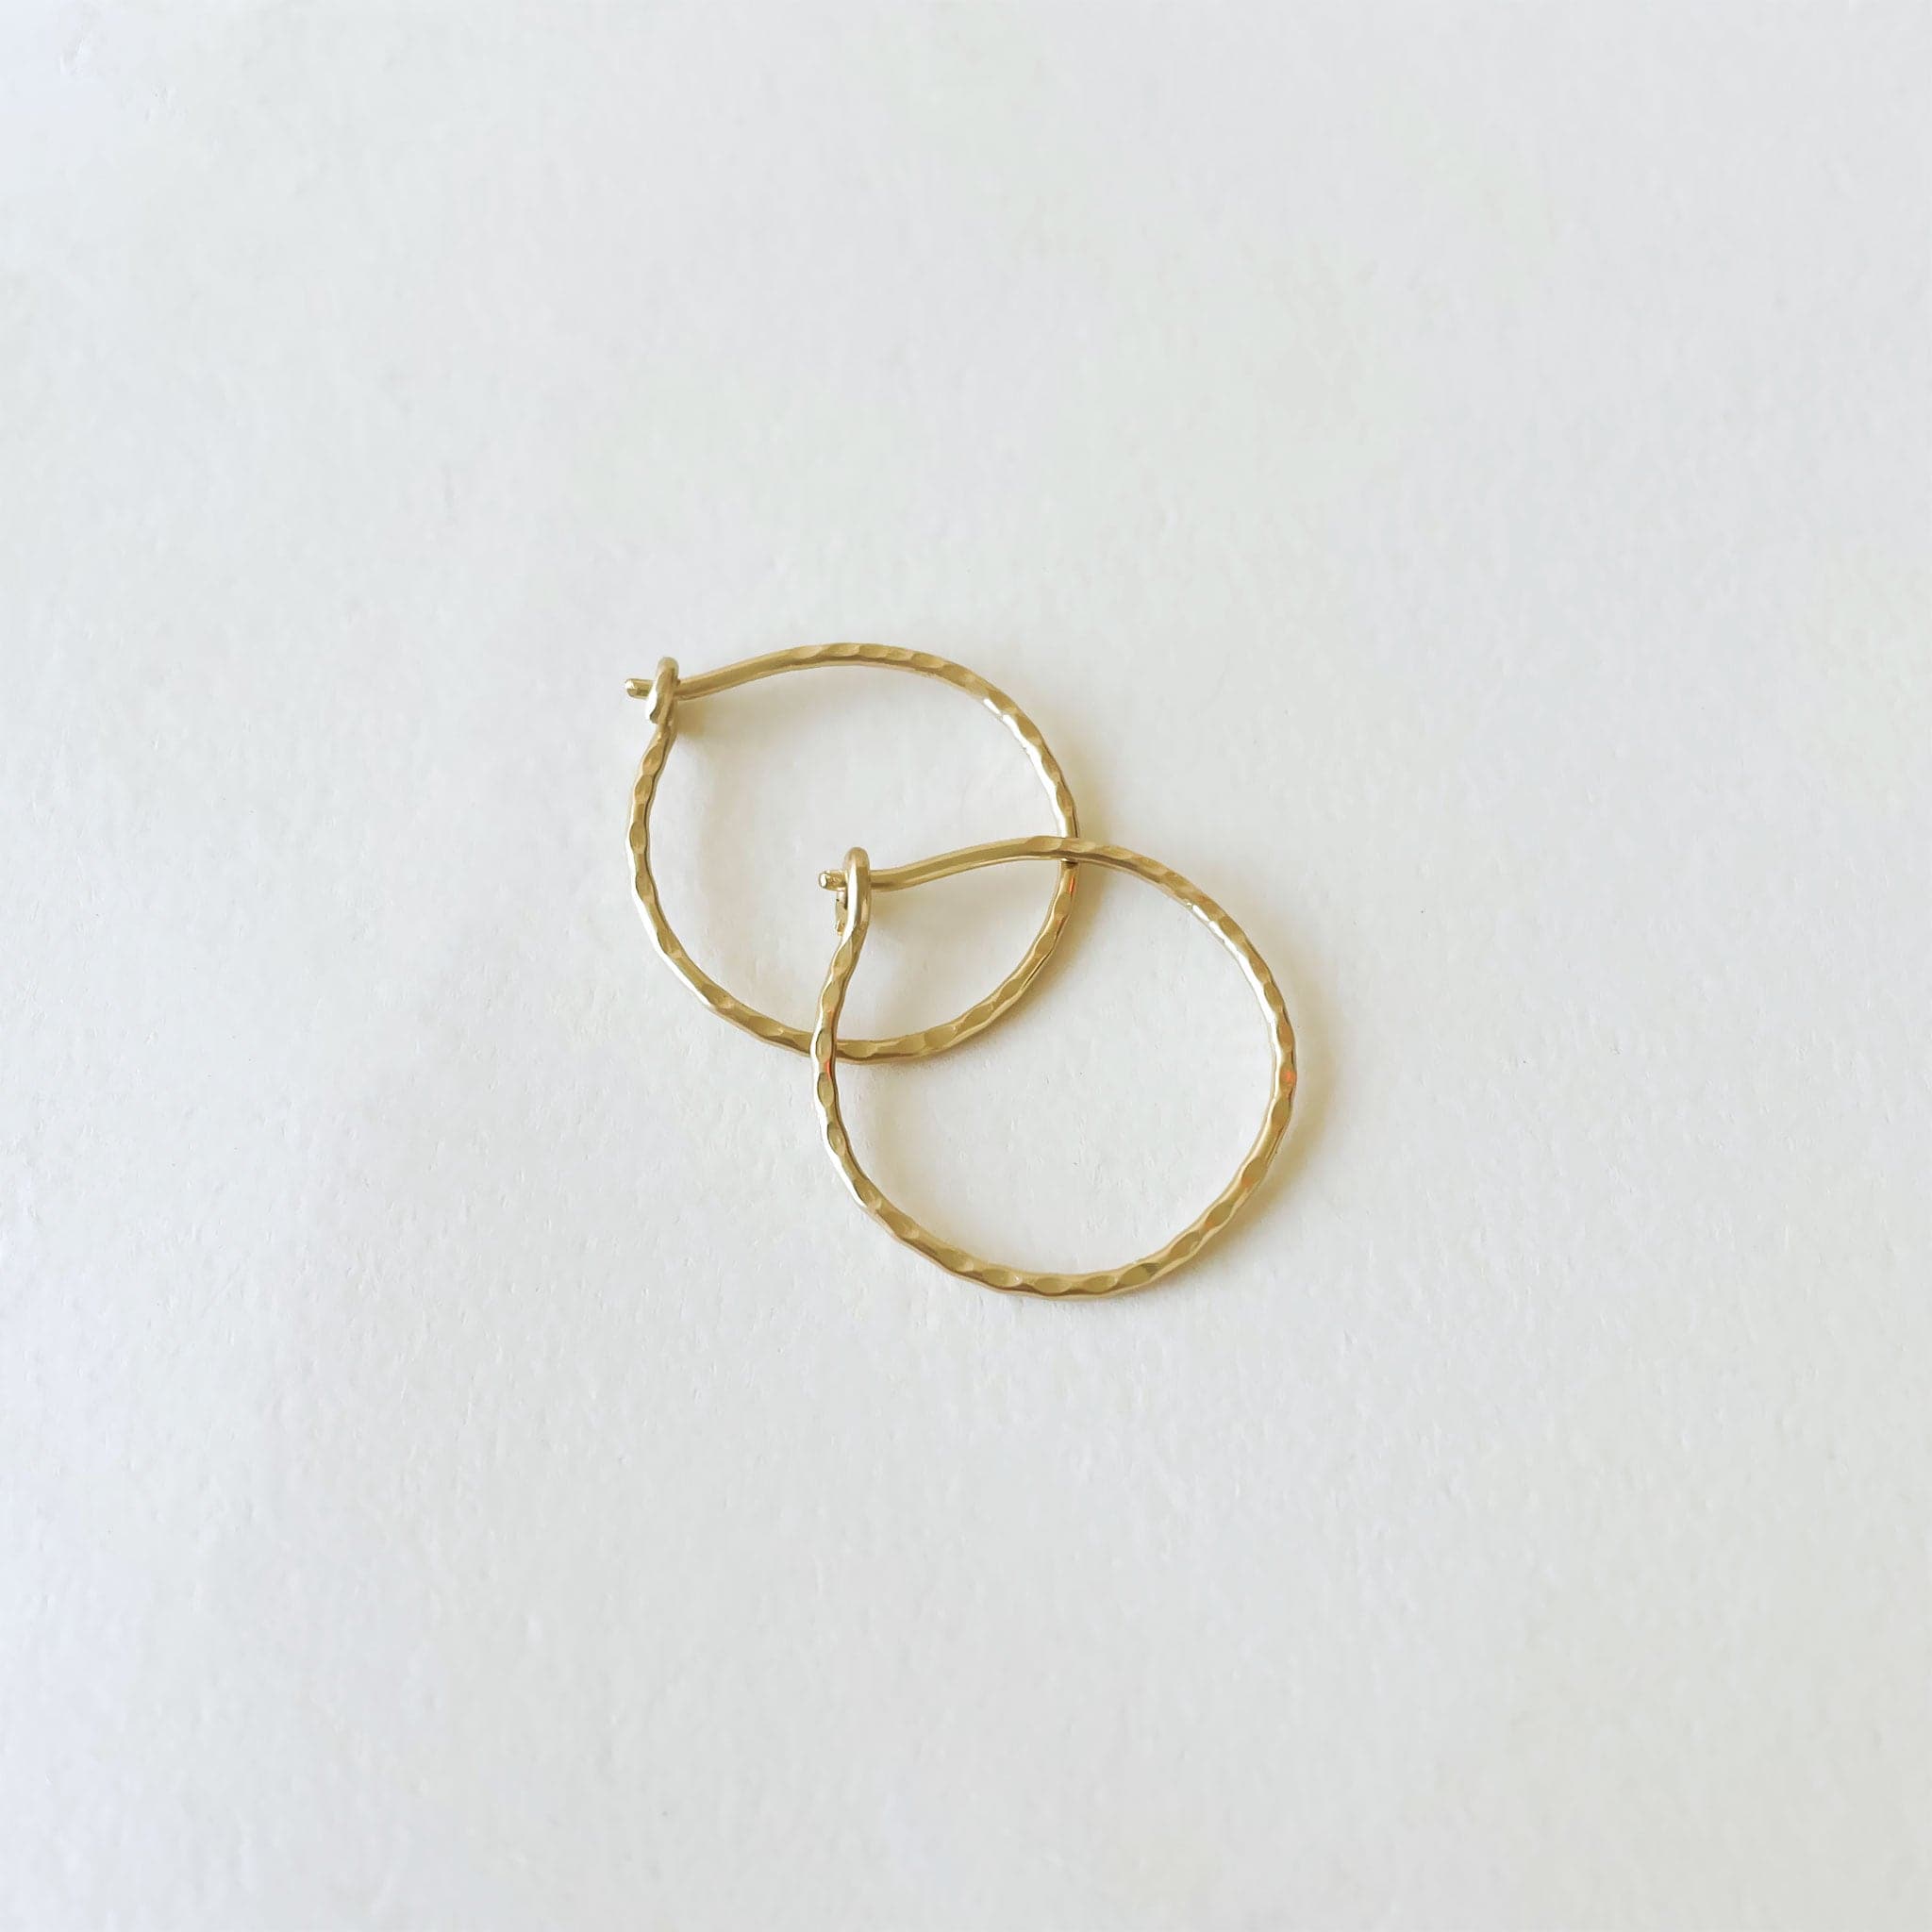 The smallest size of the hammered 14k gold hoops.